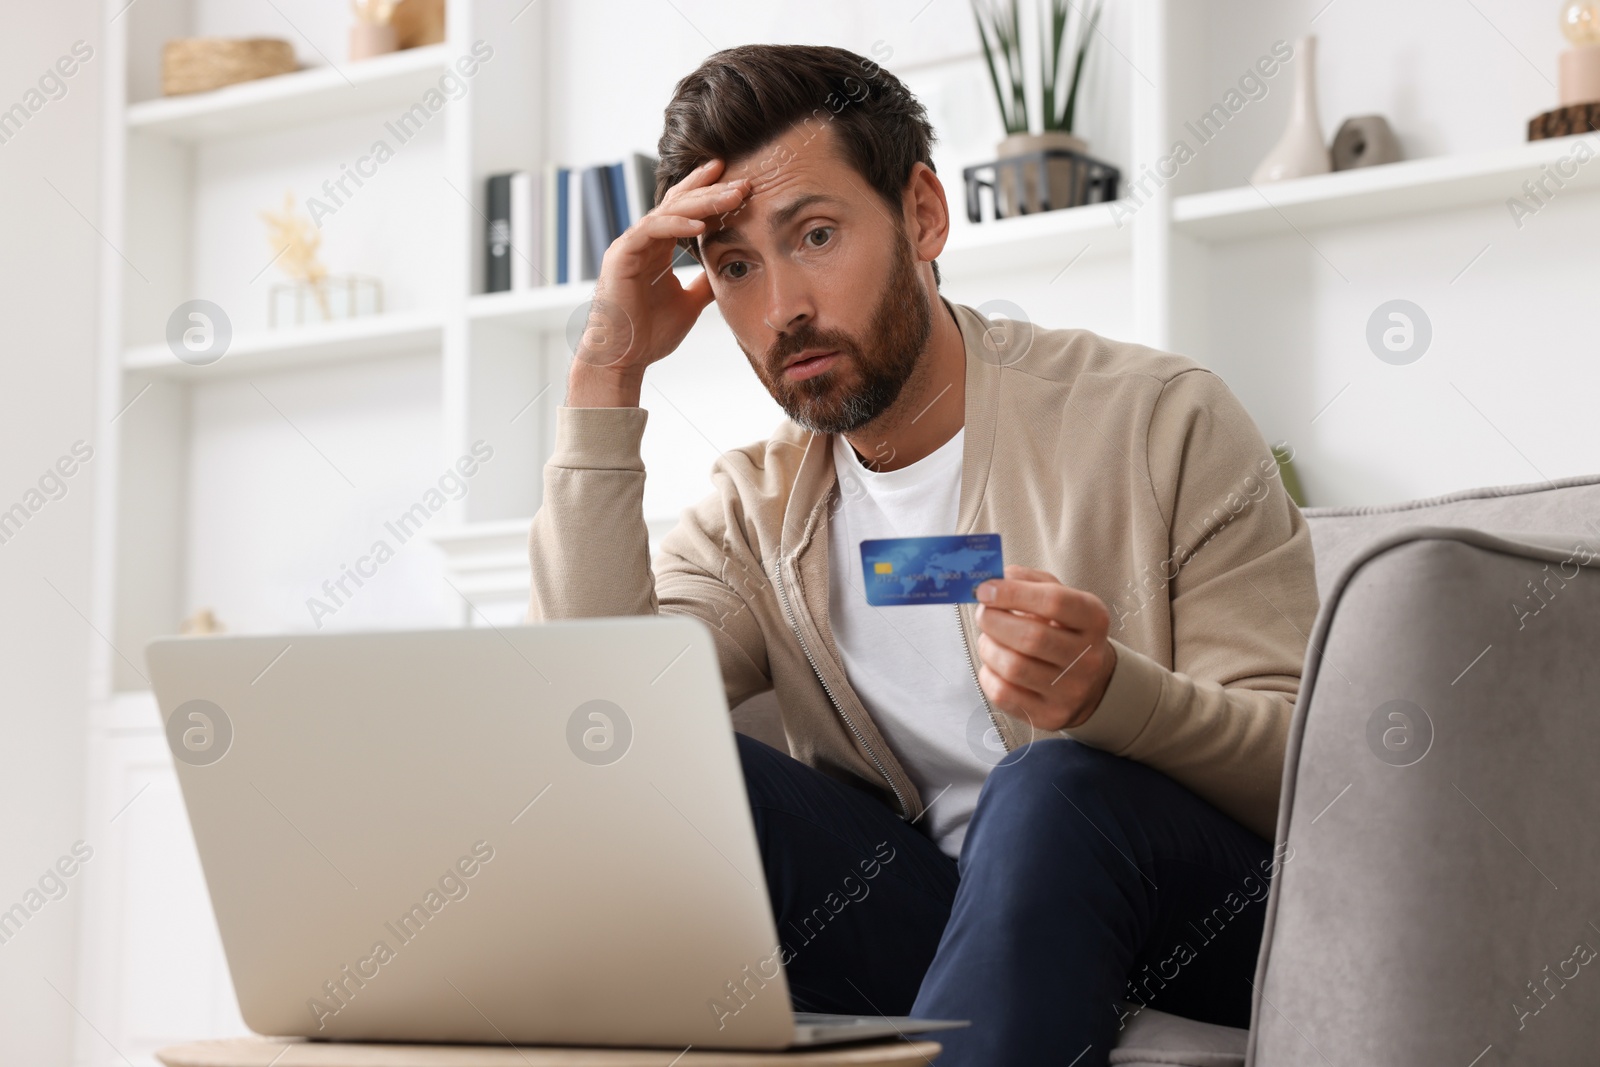 Photo of Upset man with credit card near laptop at home. Be careful - fraud